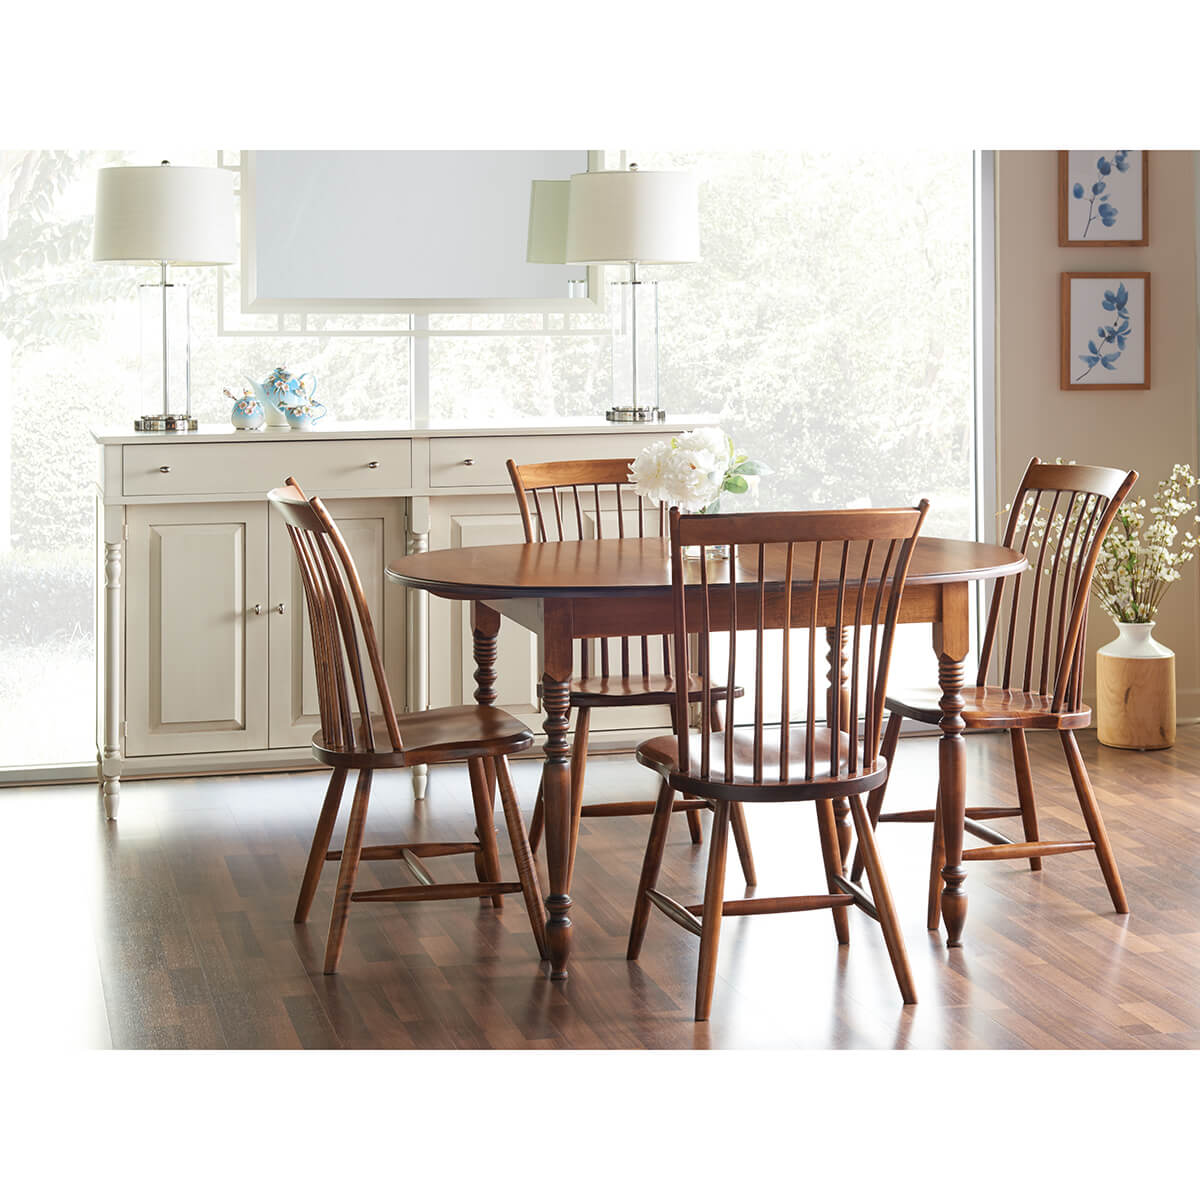 Read more about the article Kailey Dining Room Collection